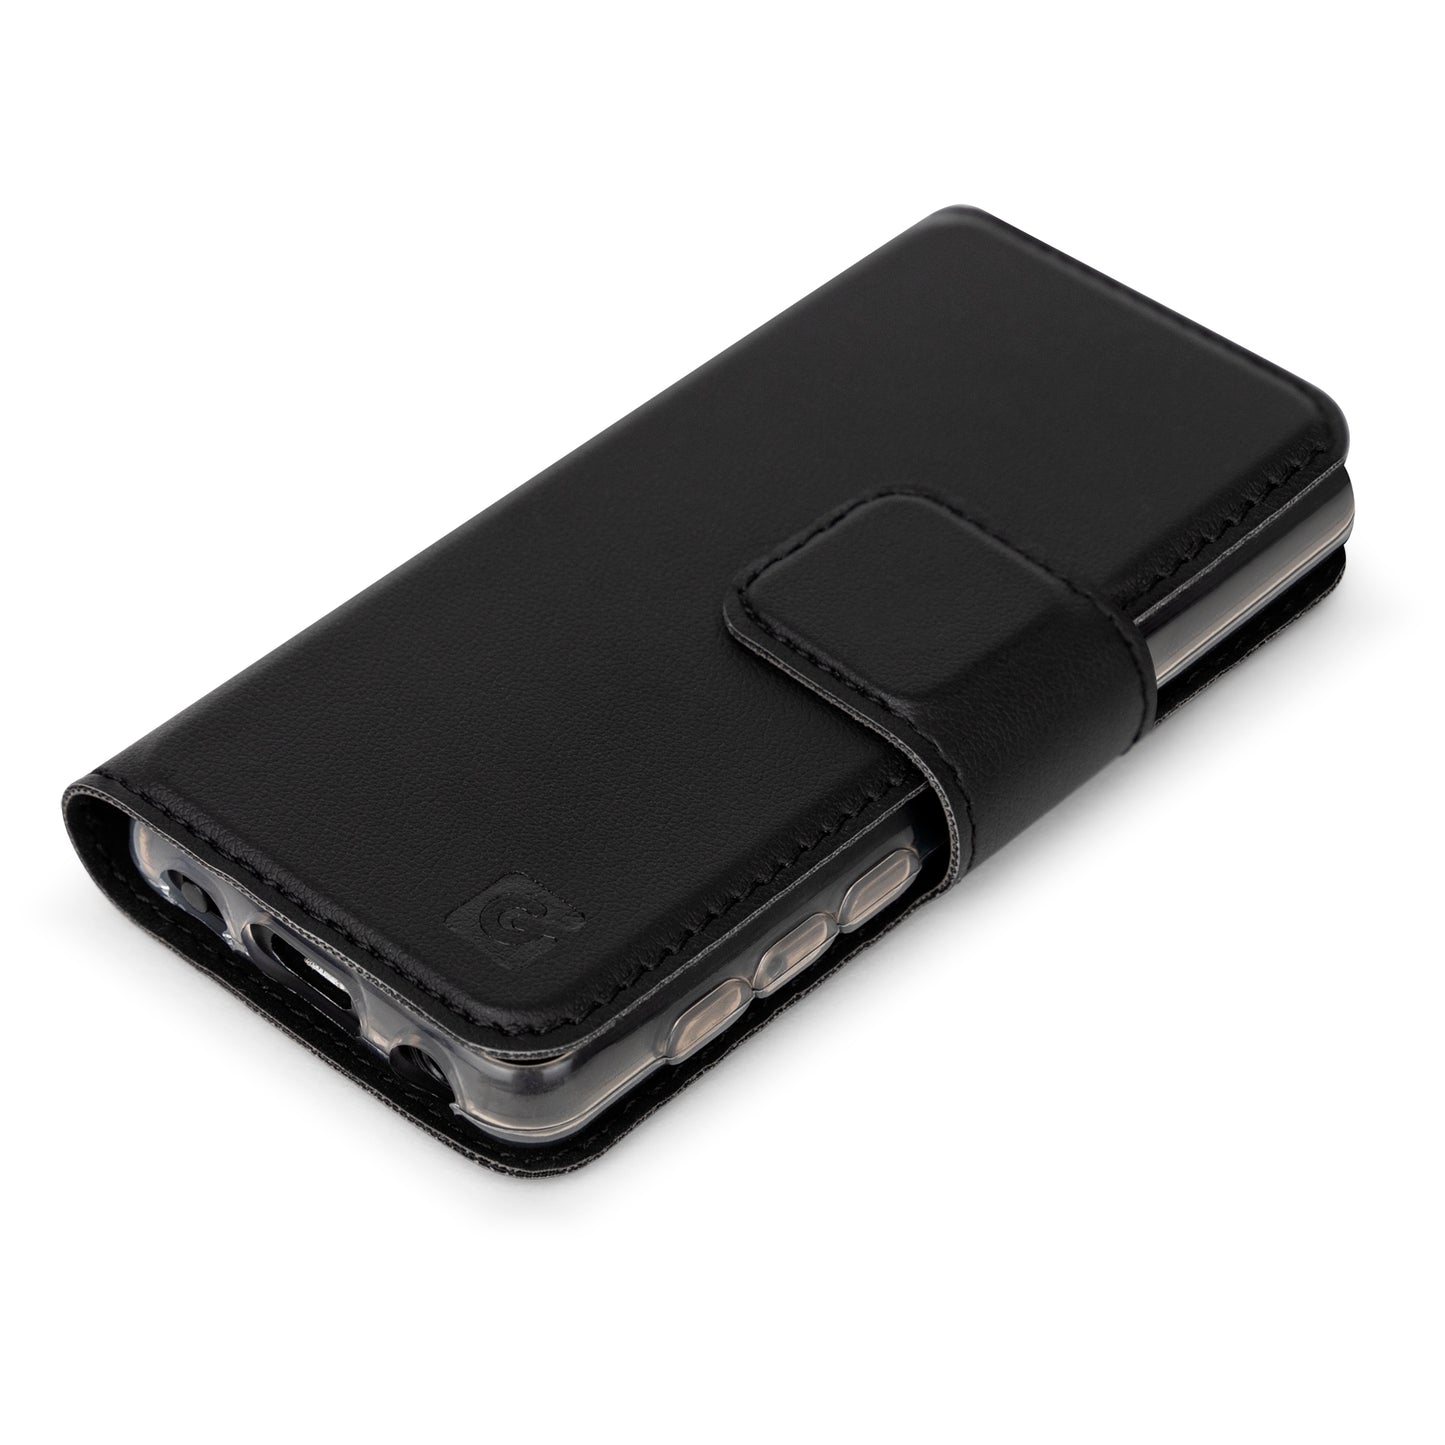 Leather Case with Screen protector fits for the Plus 2 players